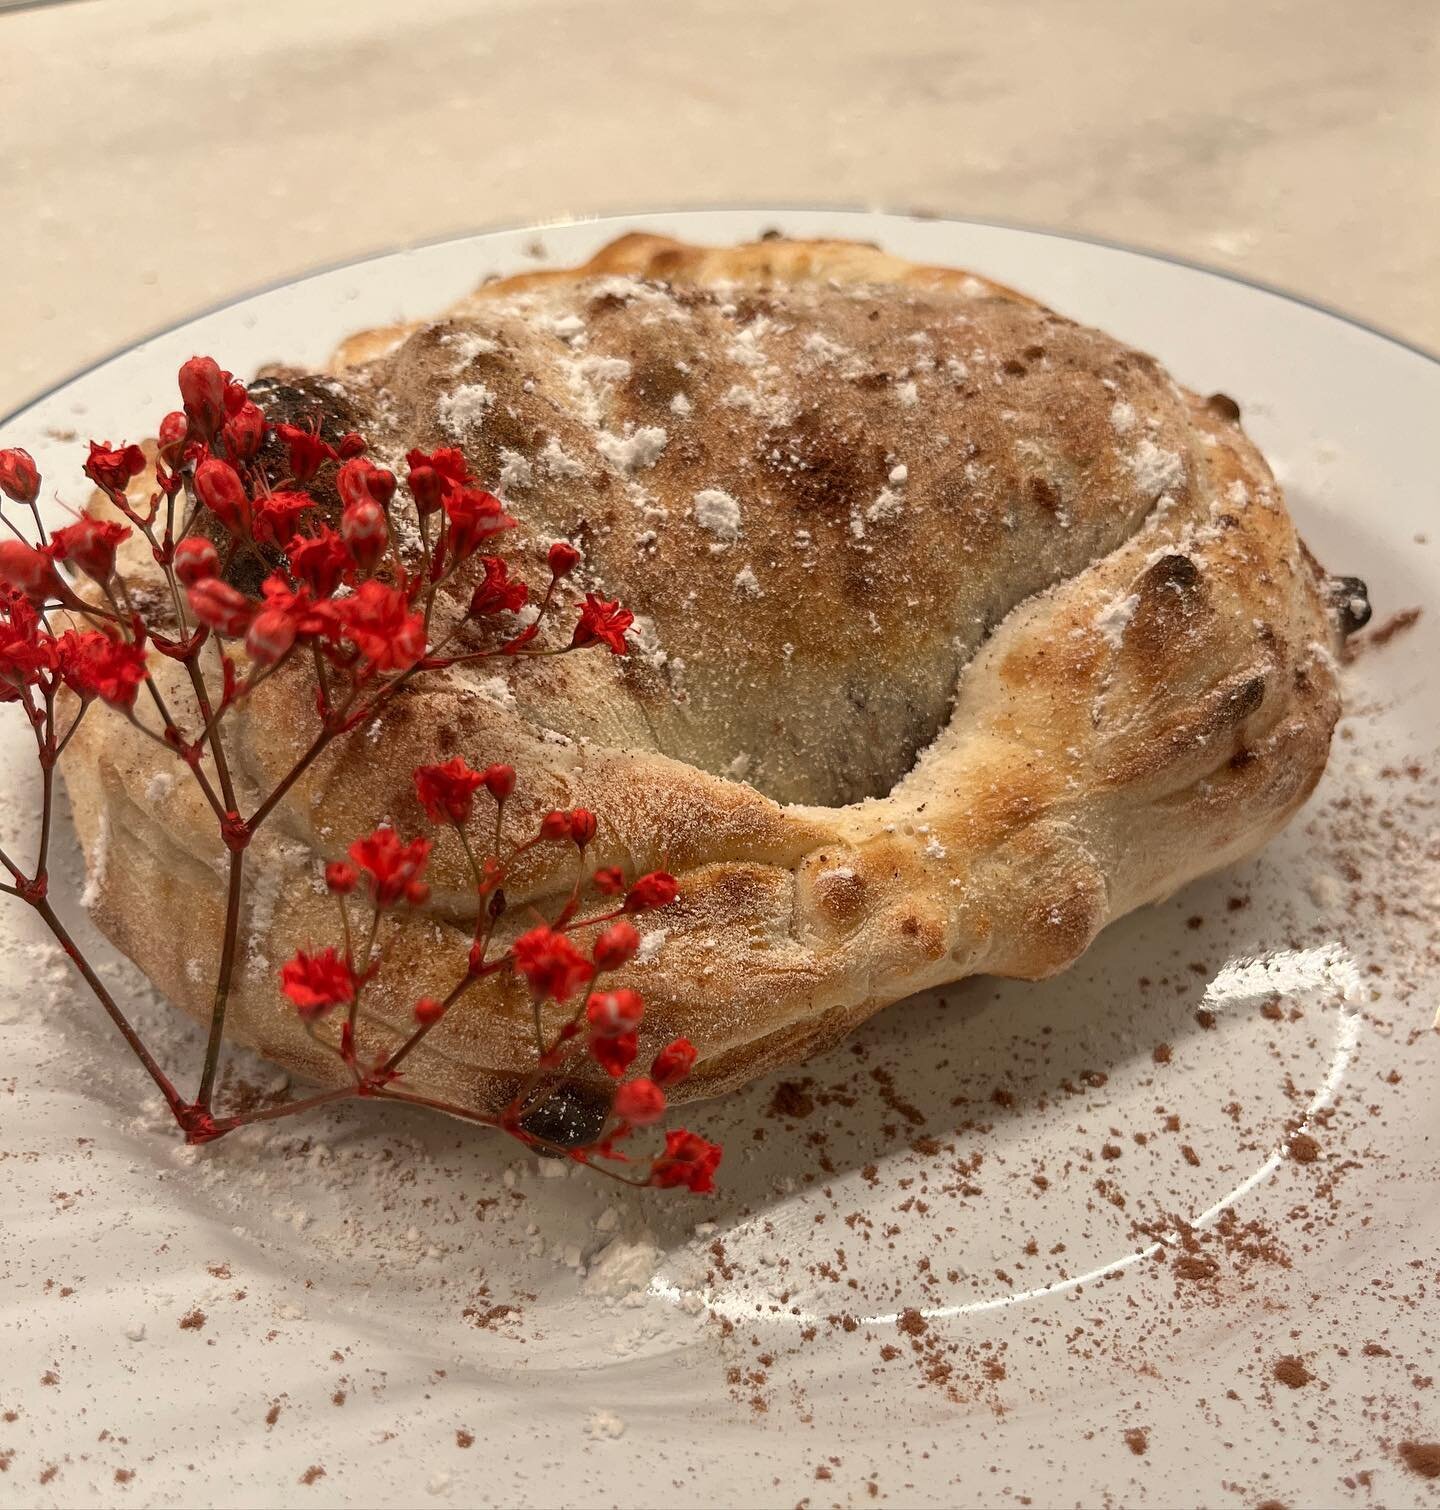 How can you say no to a Chocolate Calzone?! 🍫😋
.
.
.
.
.
.
.
#christmastreat #calzone #chocolatecalzone #chocolate #chocolateloverz #chocolatelove #bazandfred #brixtonvillage #sweetchristmas #dessert